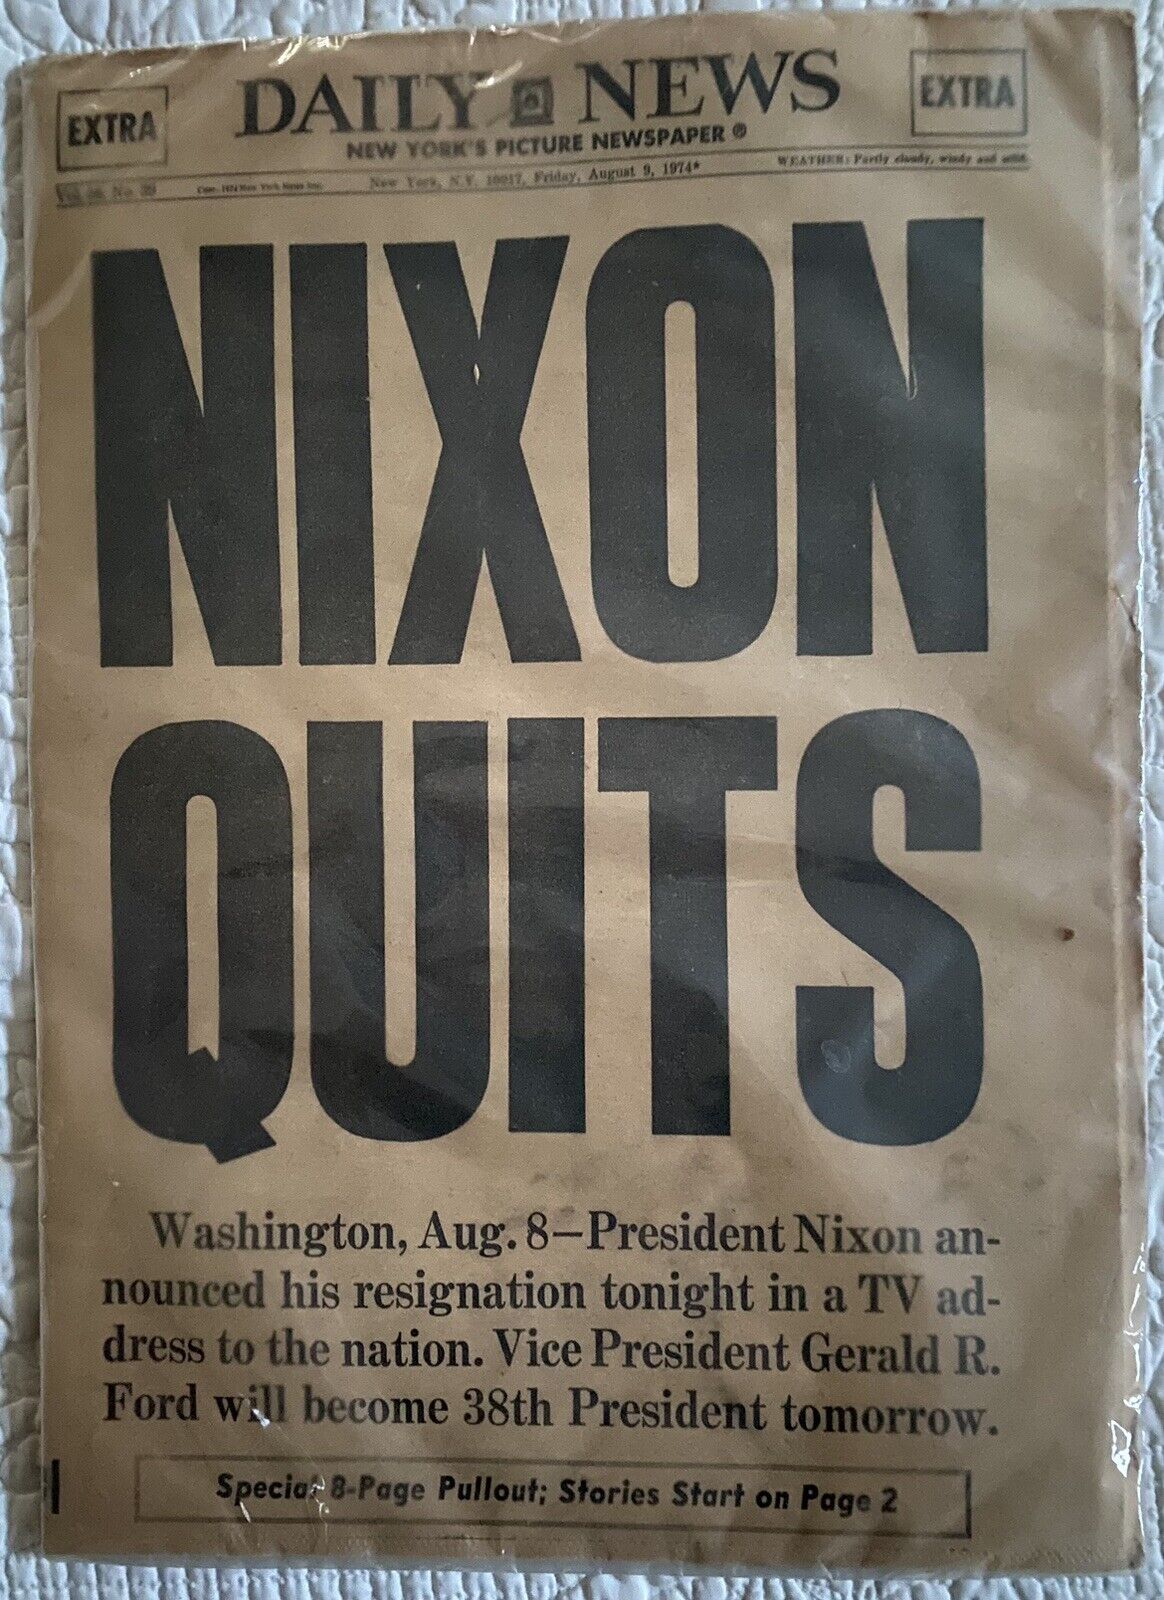 NIXON QUITS - New York Daily News Extra August 9, 1974 Newspaper